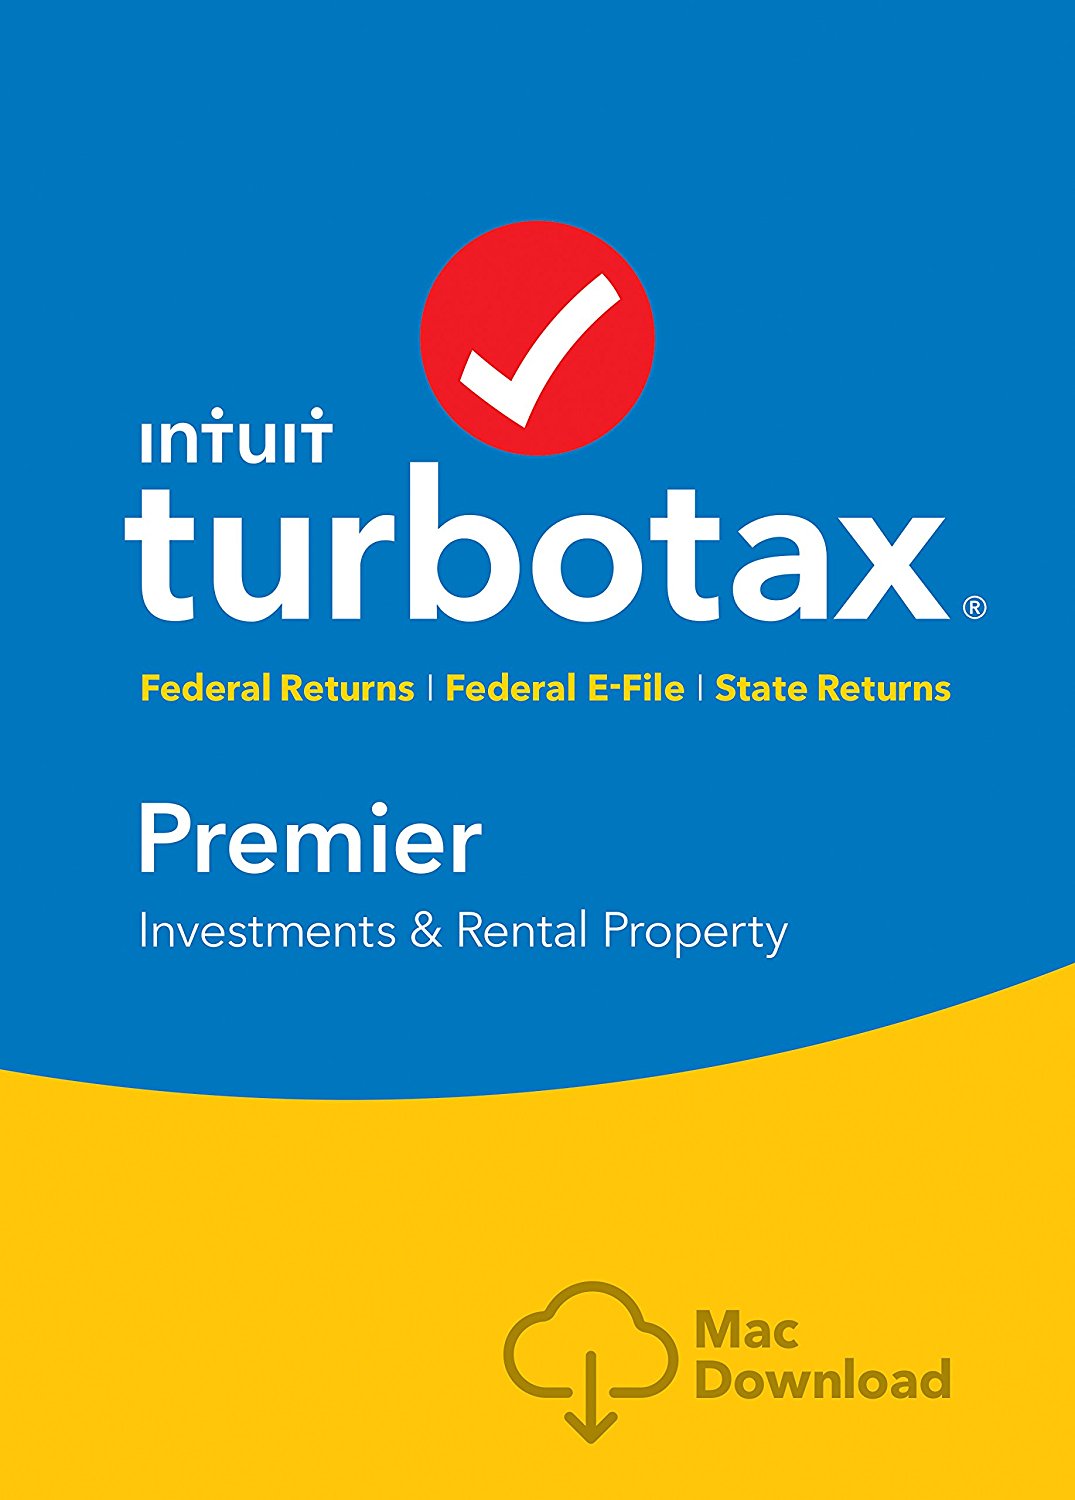 download turbo tax 2016 software